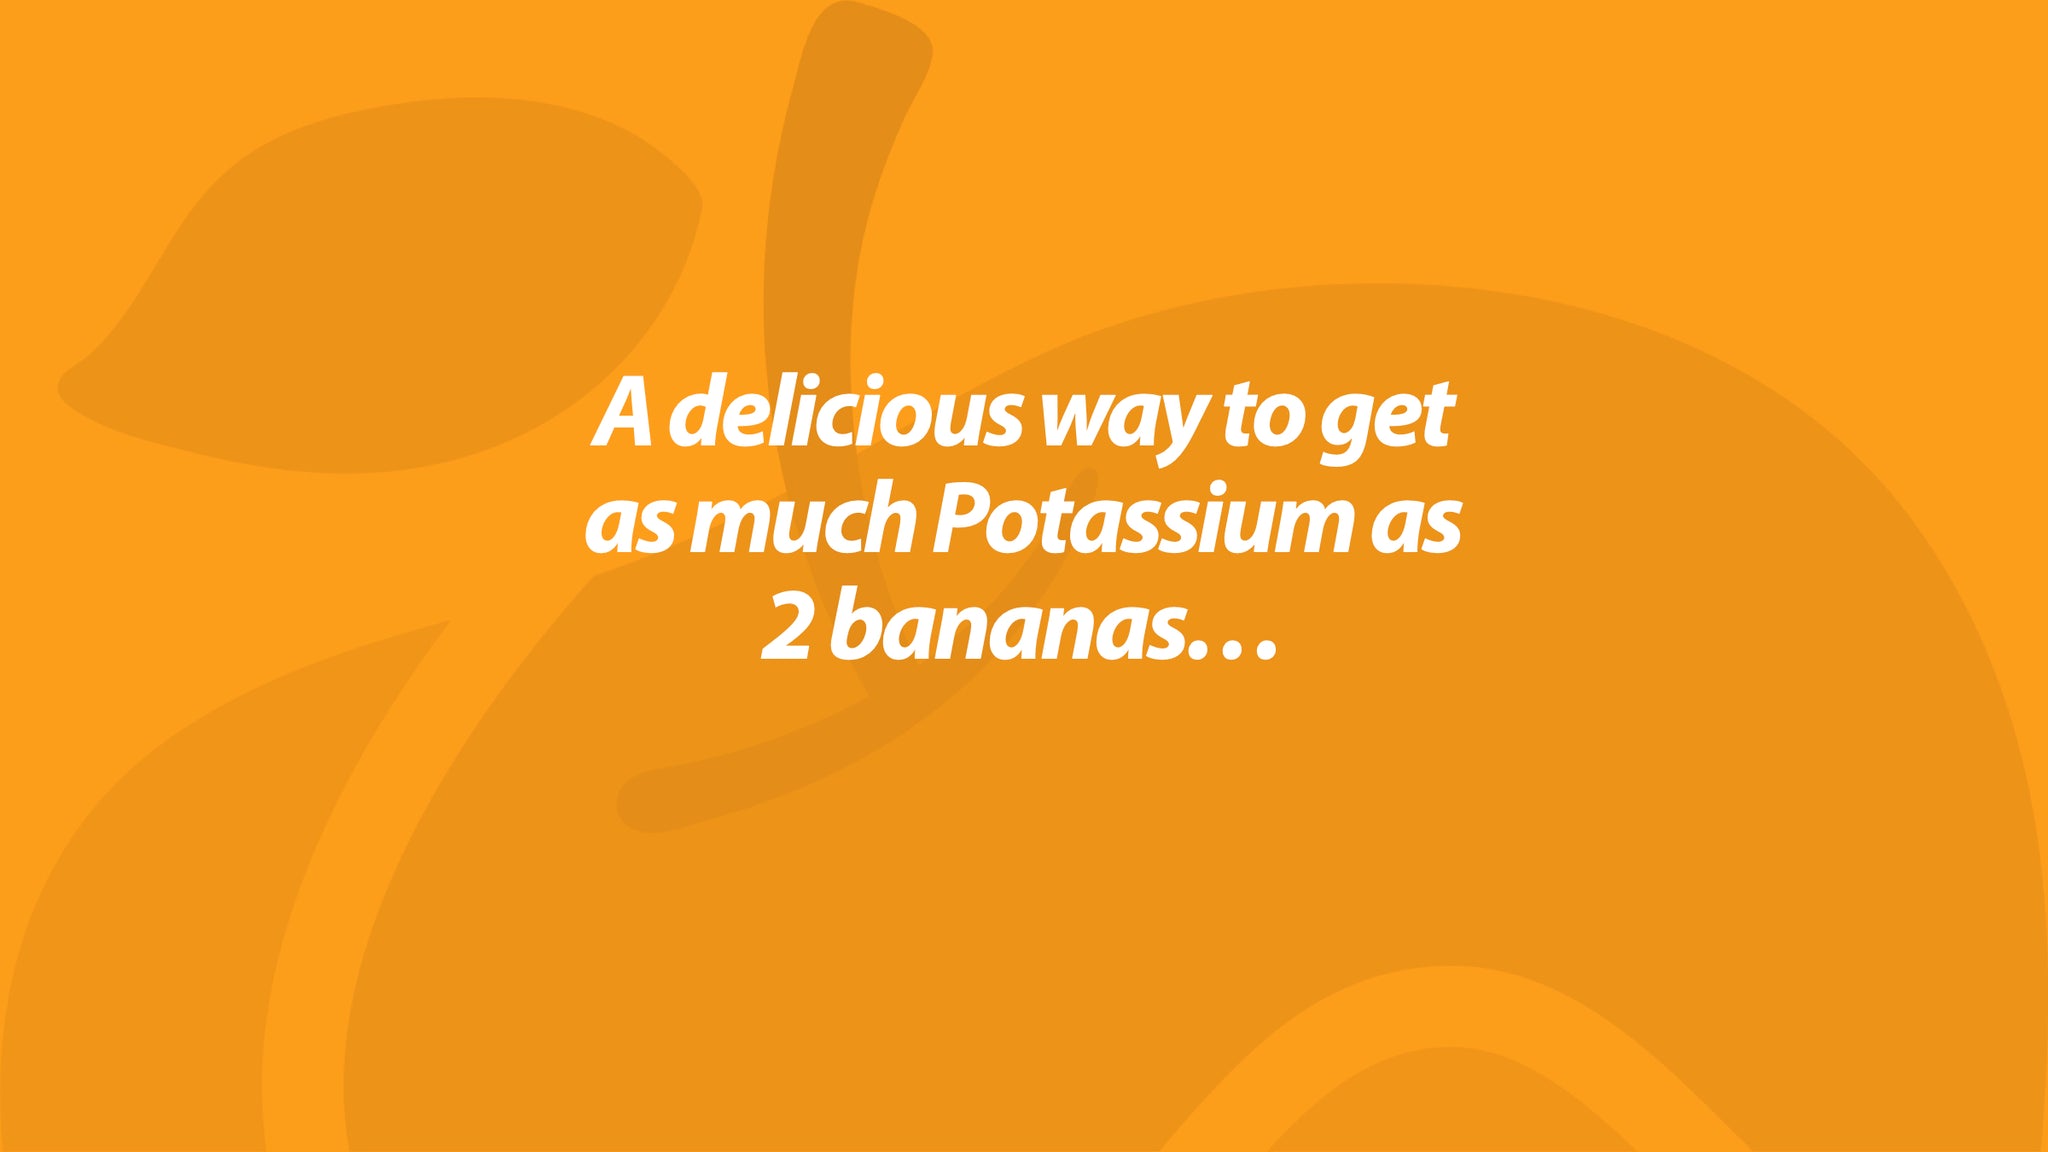 A delicious way to get as much Potassium as 2 bananas…